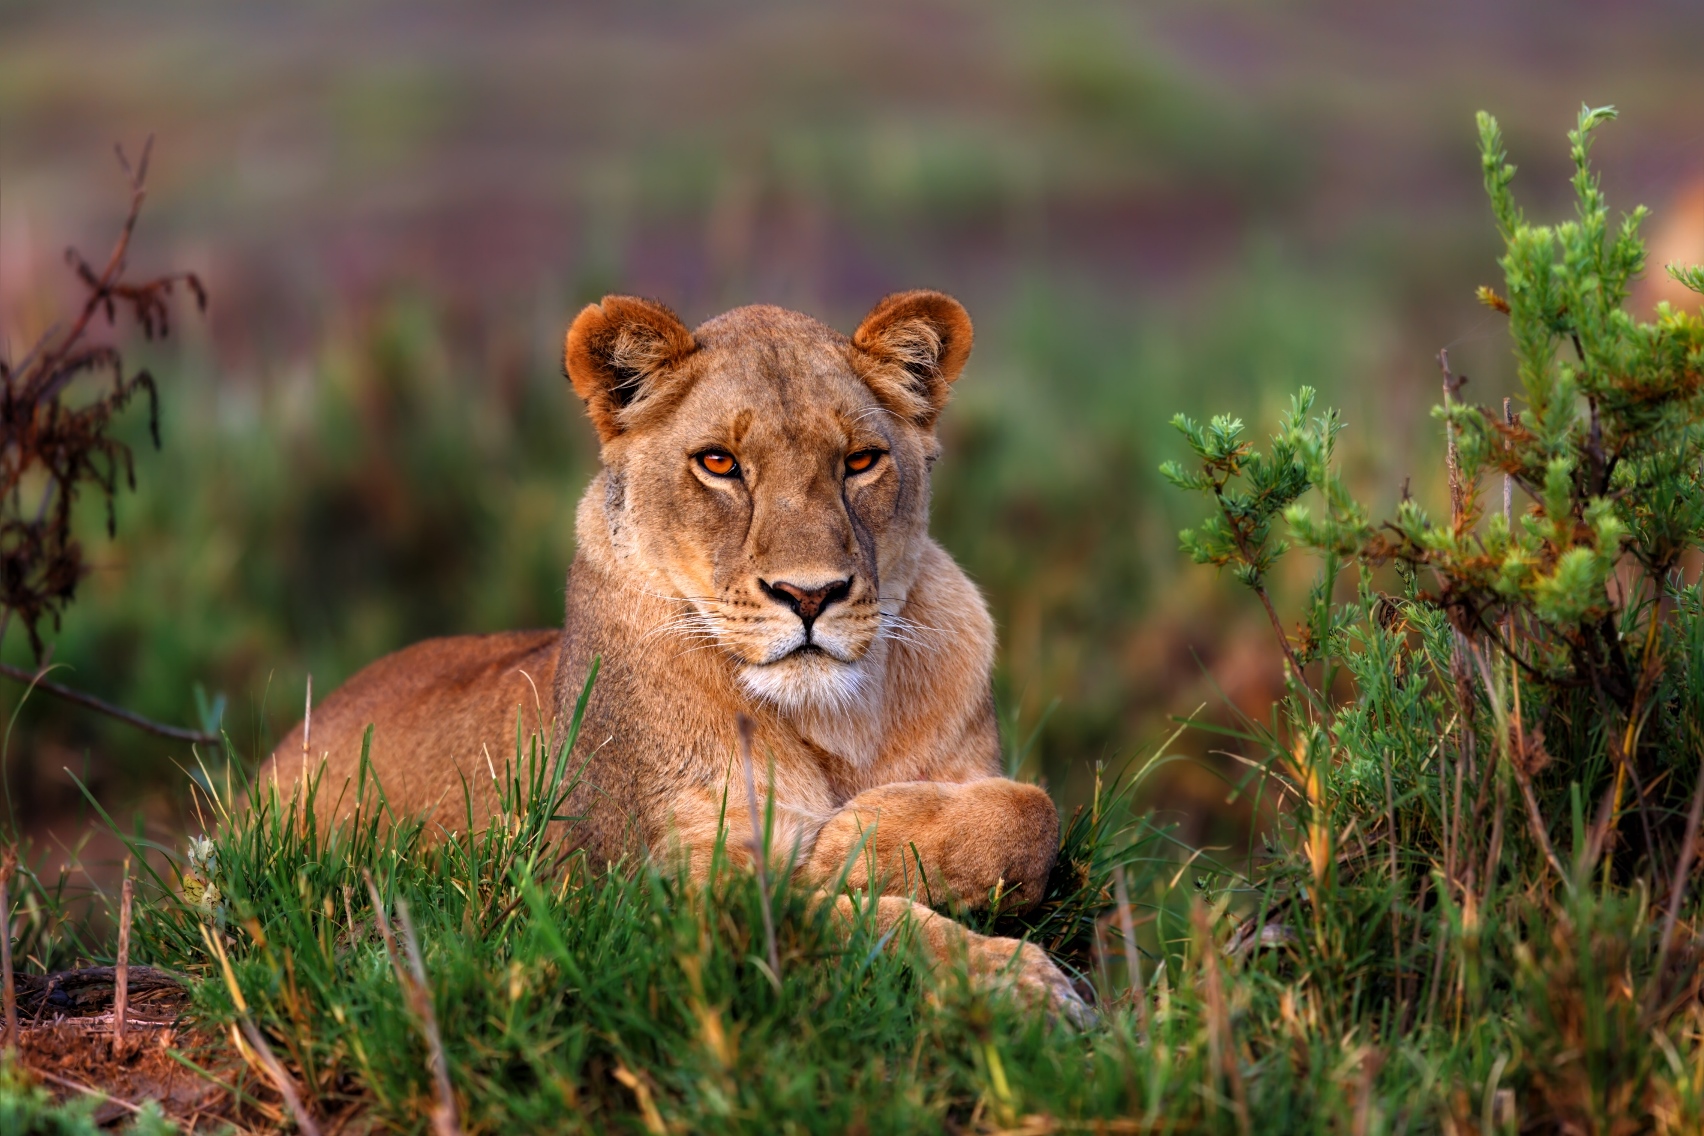 A lioness in Africa